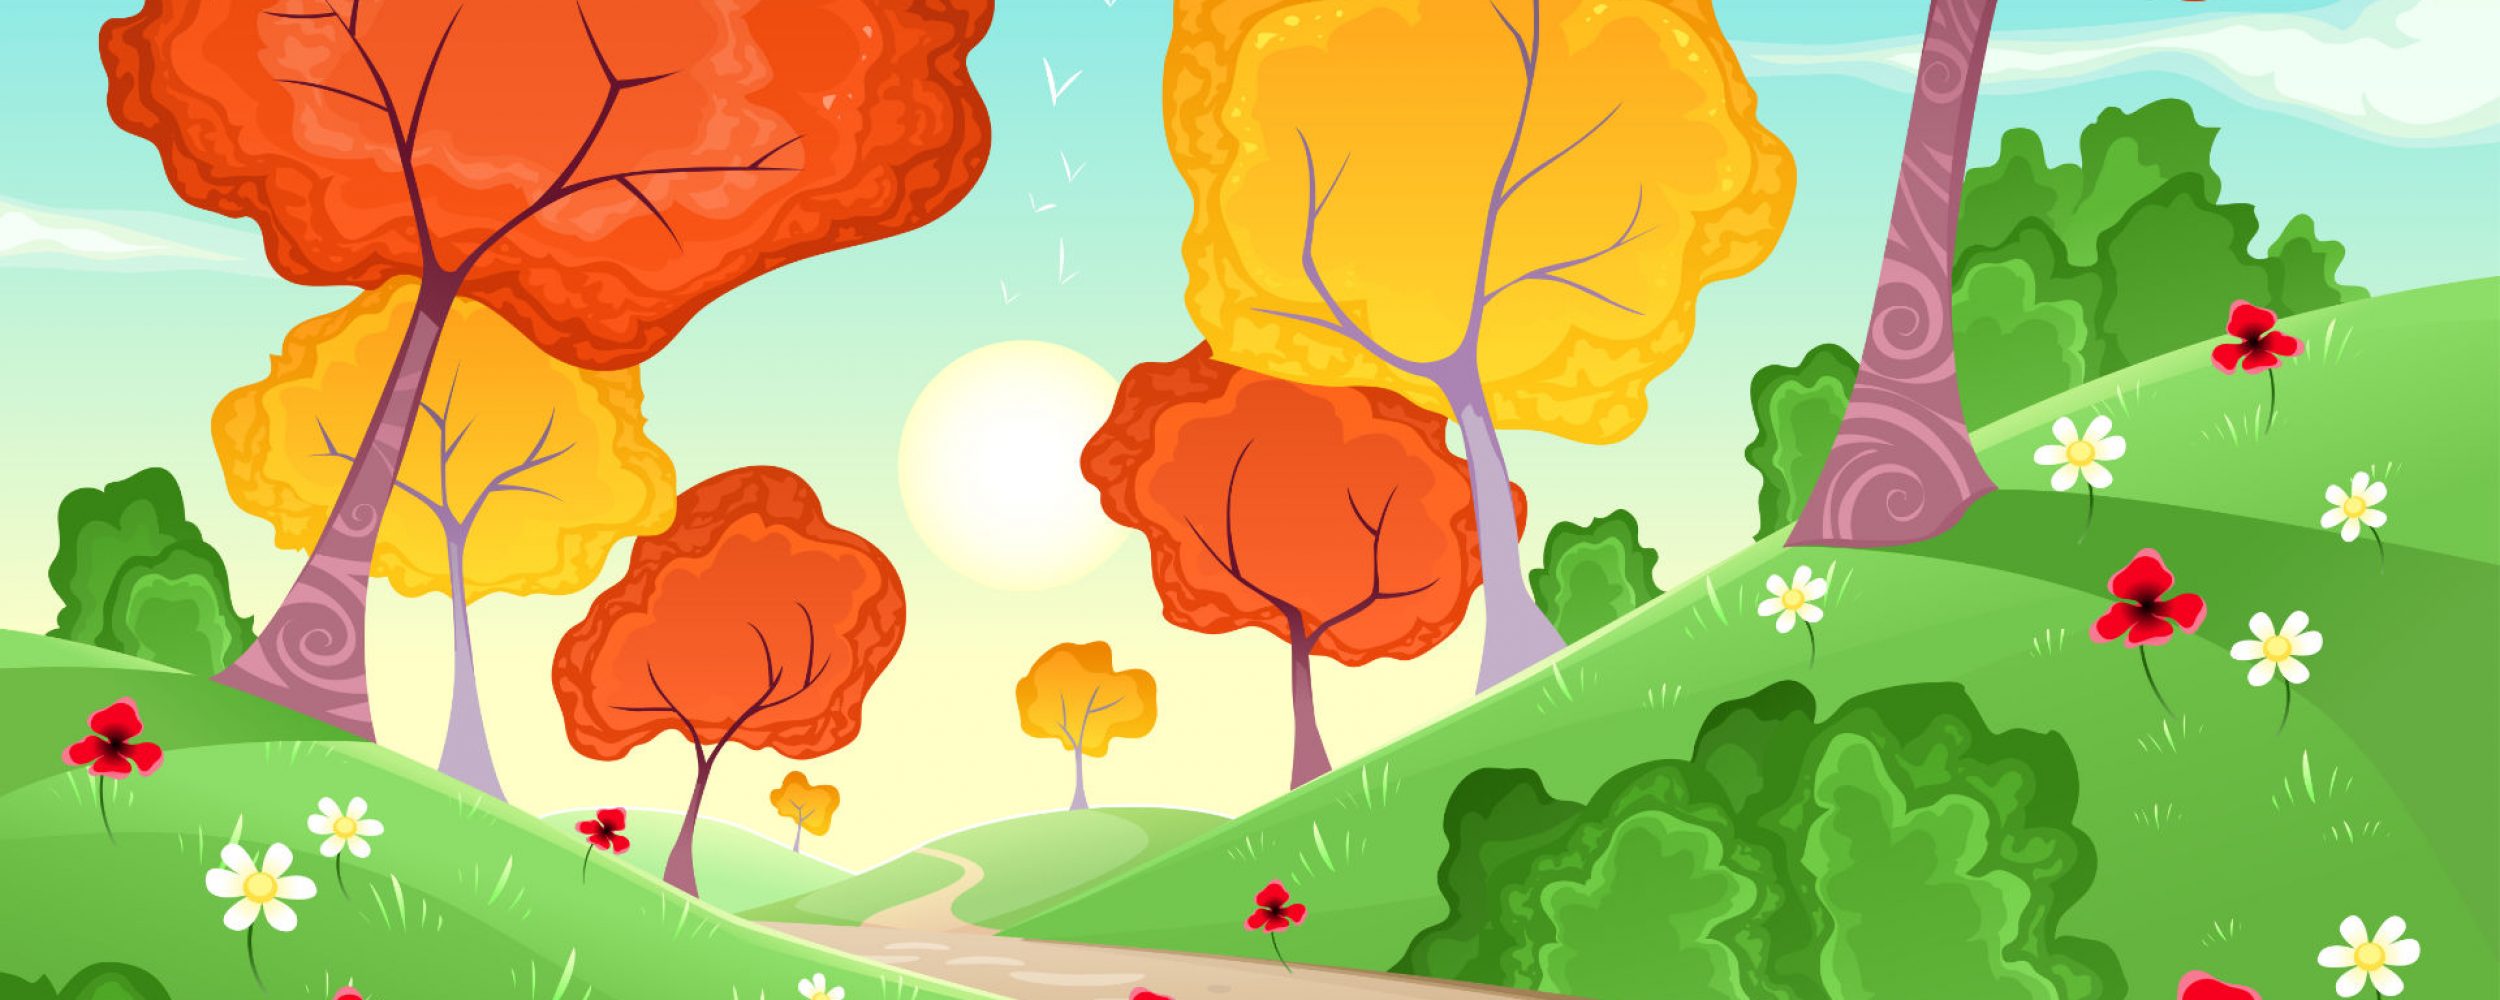 Landscape with trees. Cartoon and vector illustration